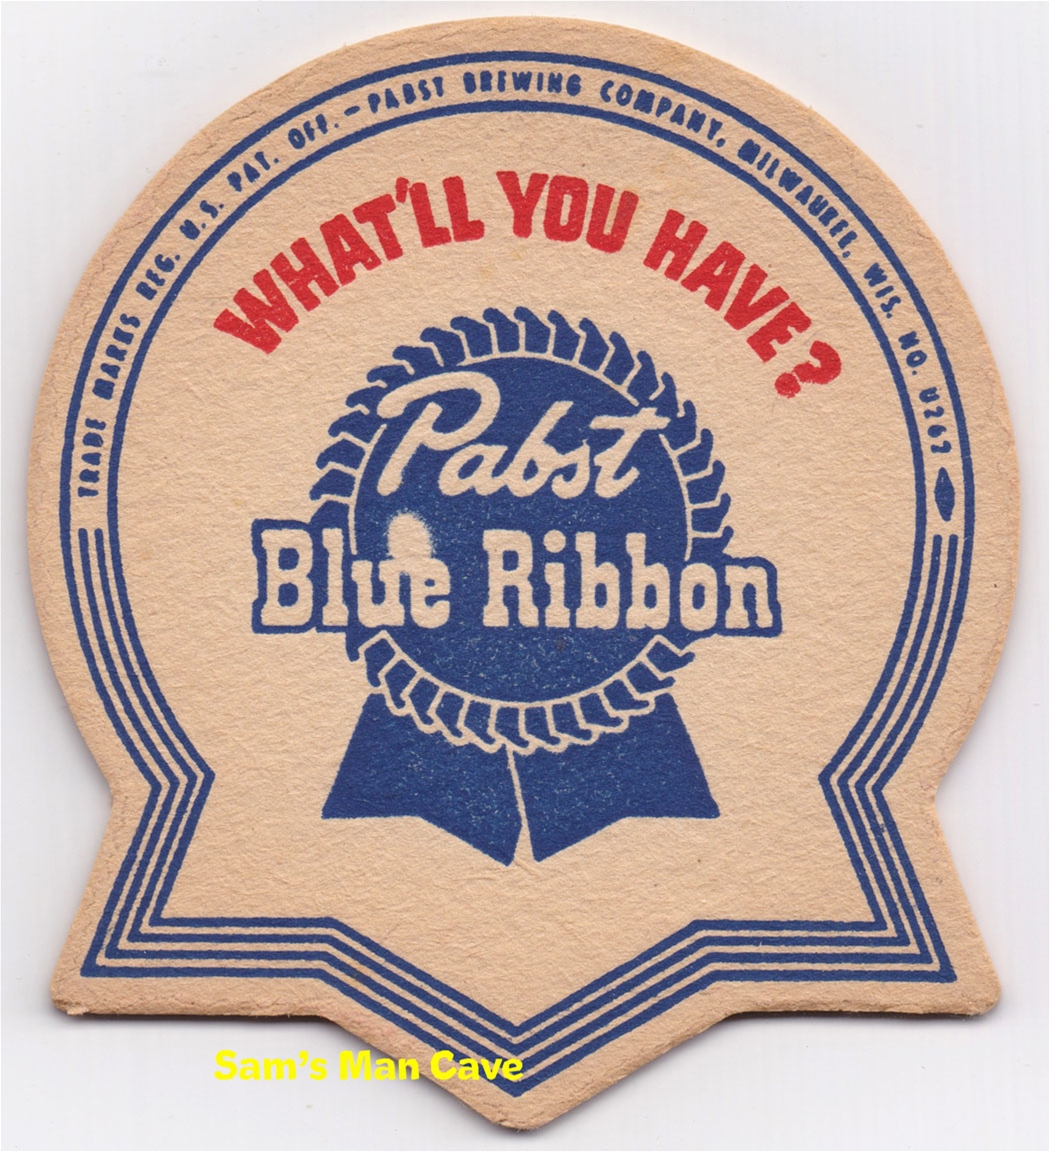 Pabst Blue Ribbon What'll You Have Beer Coaster